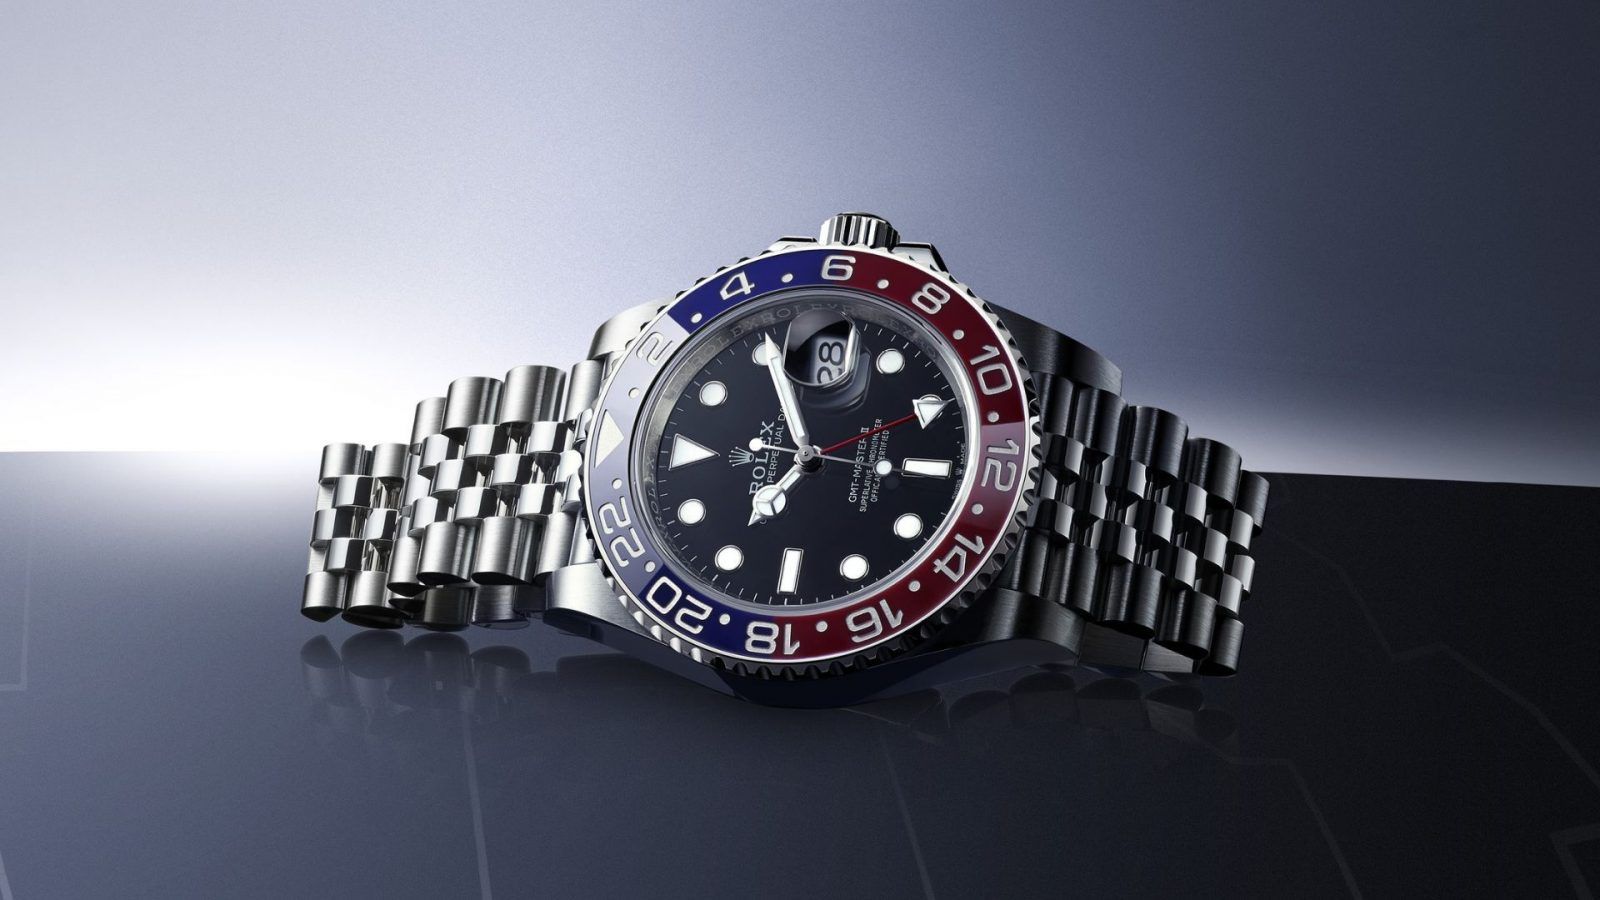 Here Are The Top 5 Best Selling Submariner Models That Never Get